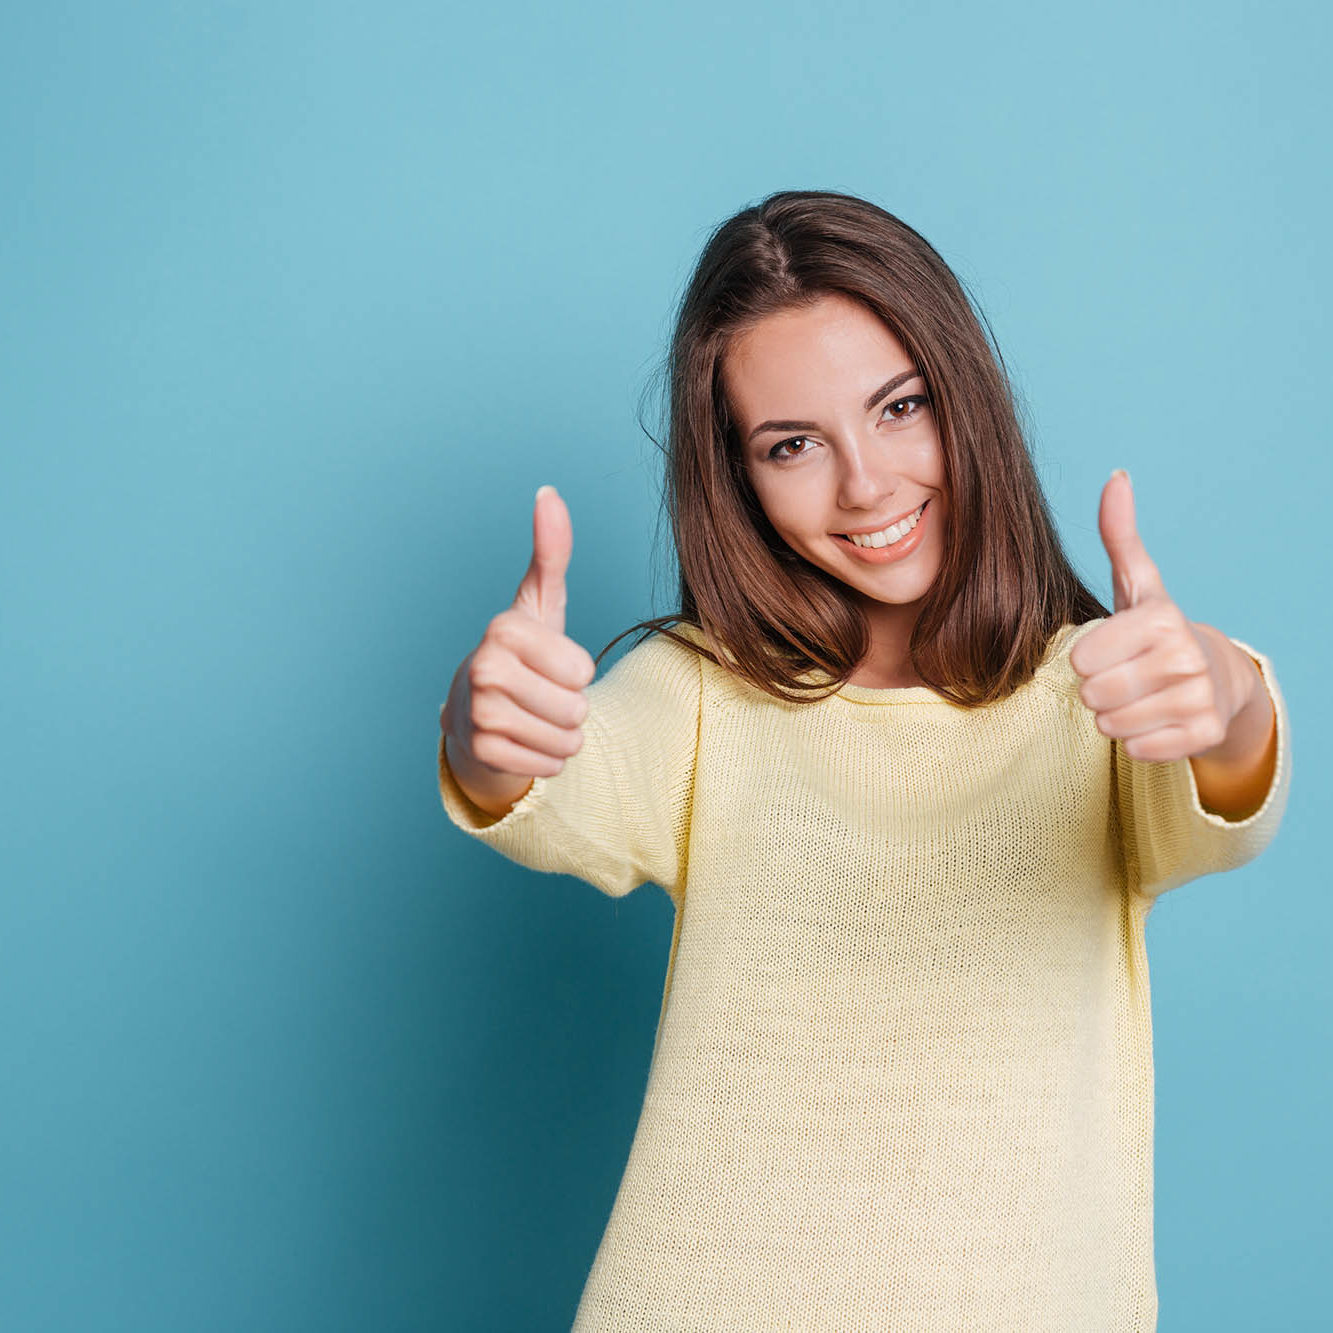 Beautiful woman giving thumbs up over blue background